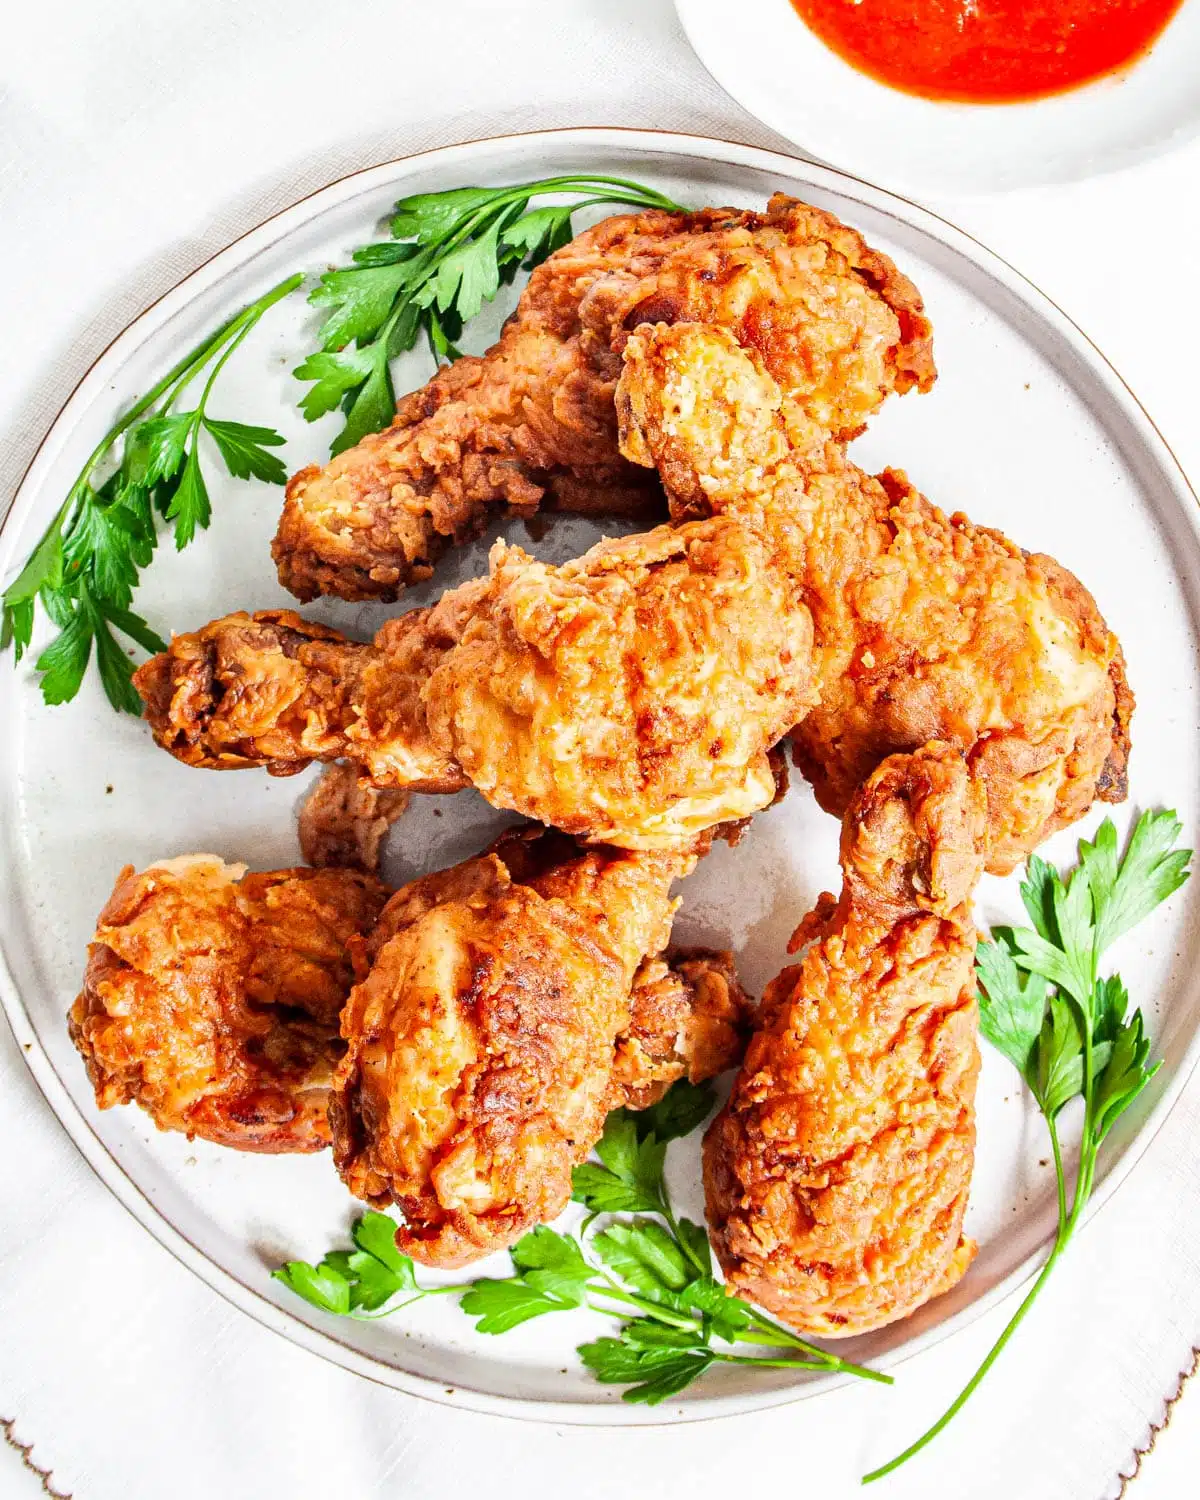 For Fried Chicken, One Air Fryer Stands Above The Rest